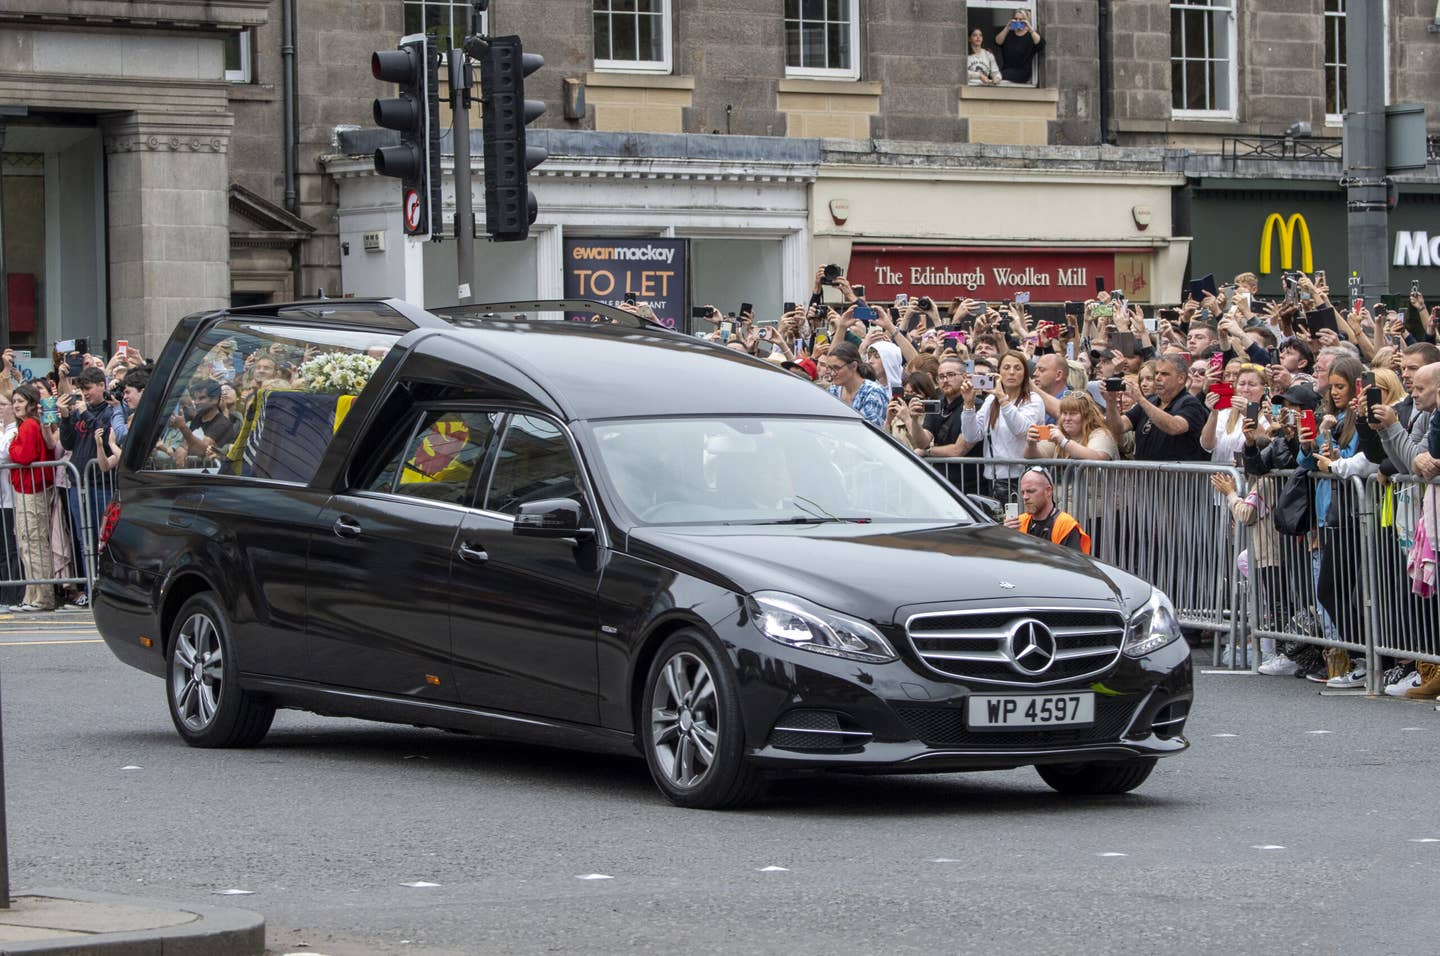 Yes, the Queen’s Hearse Is a Mercedes